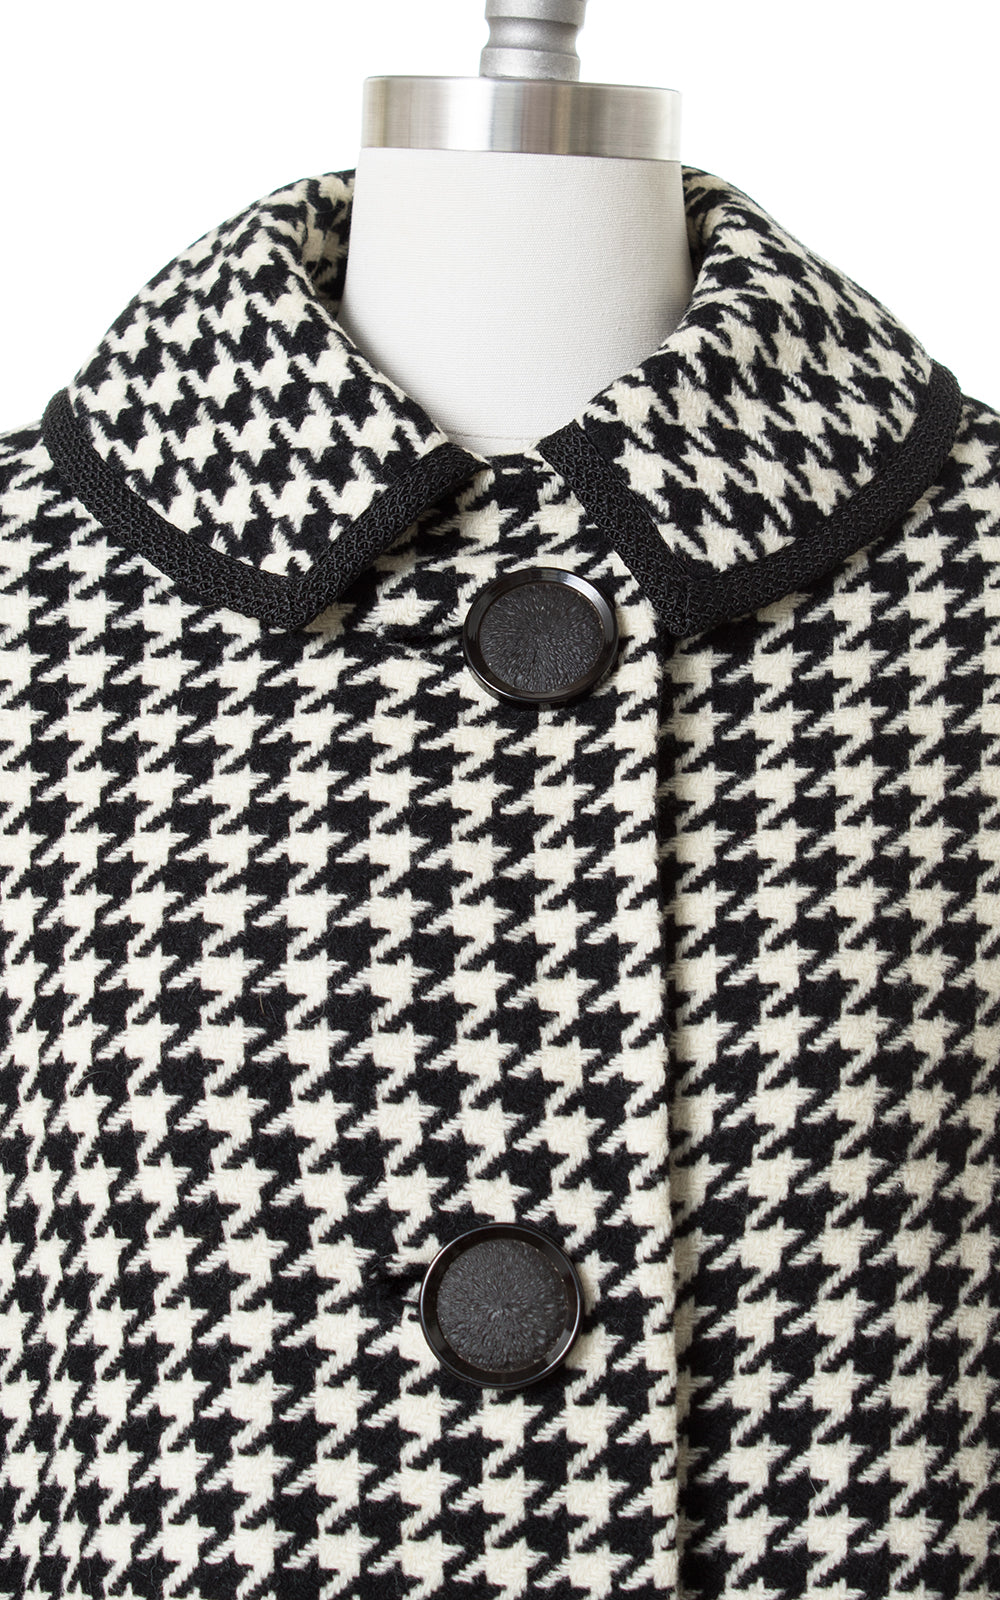 1960s Black & White Houndstooth Wool Cape